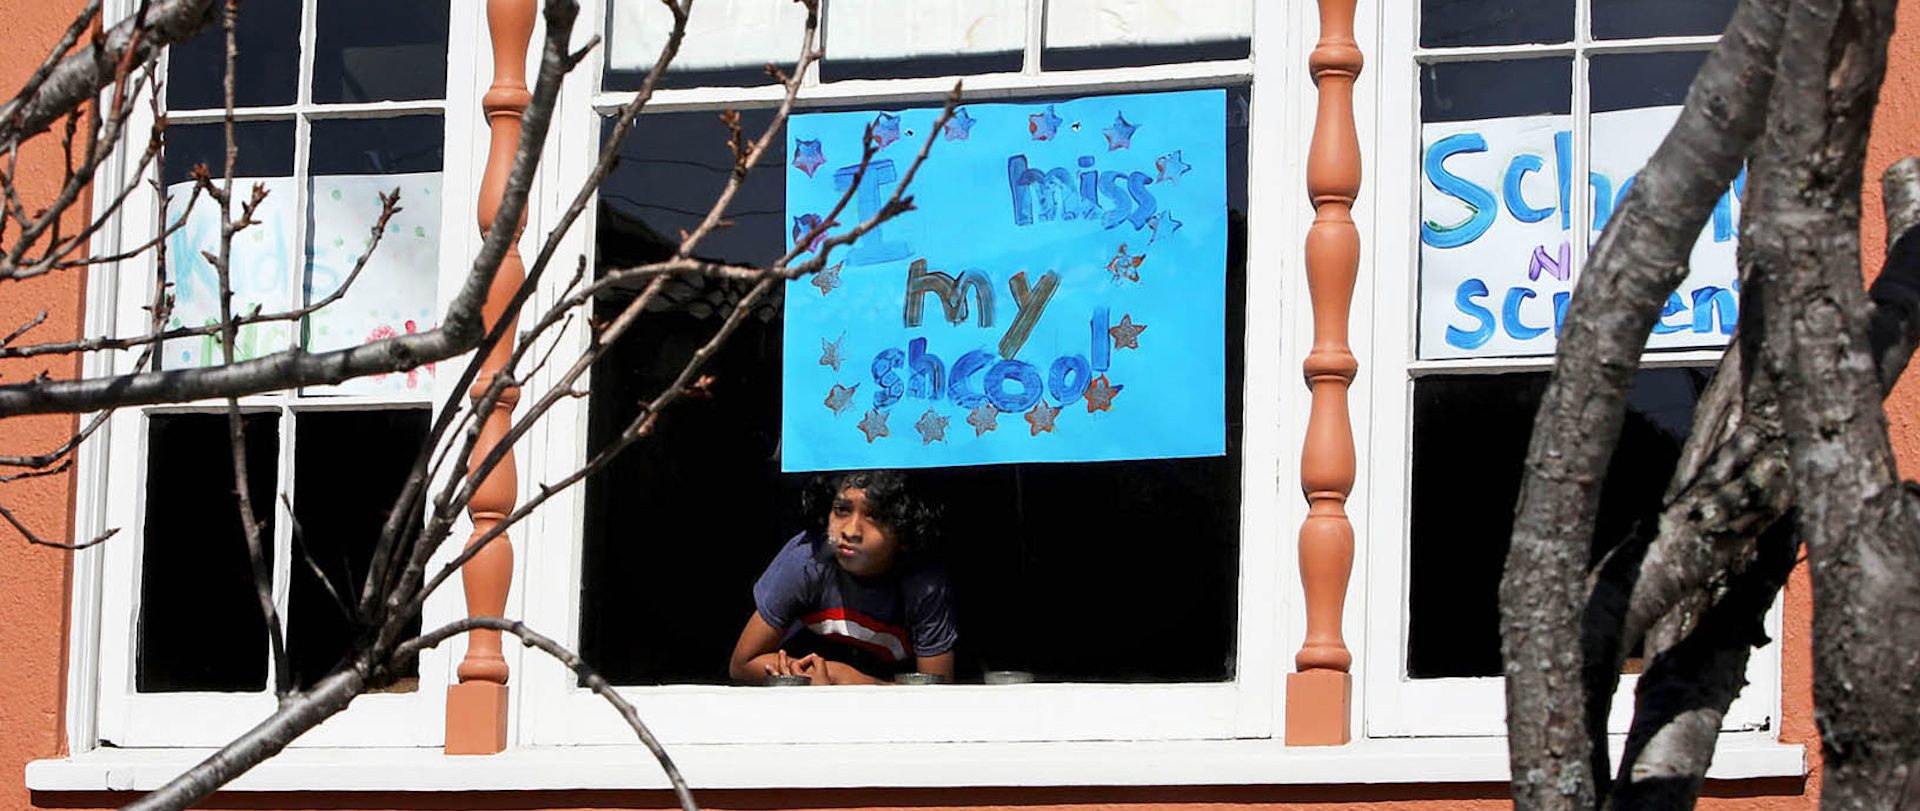 Jeevan Guha, 6, poses for a portrait near his homemade sign in San Francisco. His sign reads, "I miss my school."